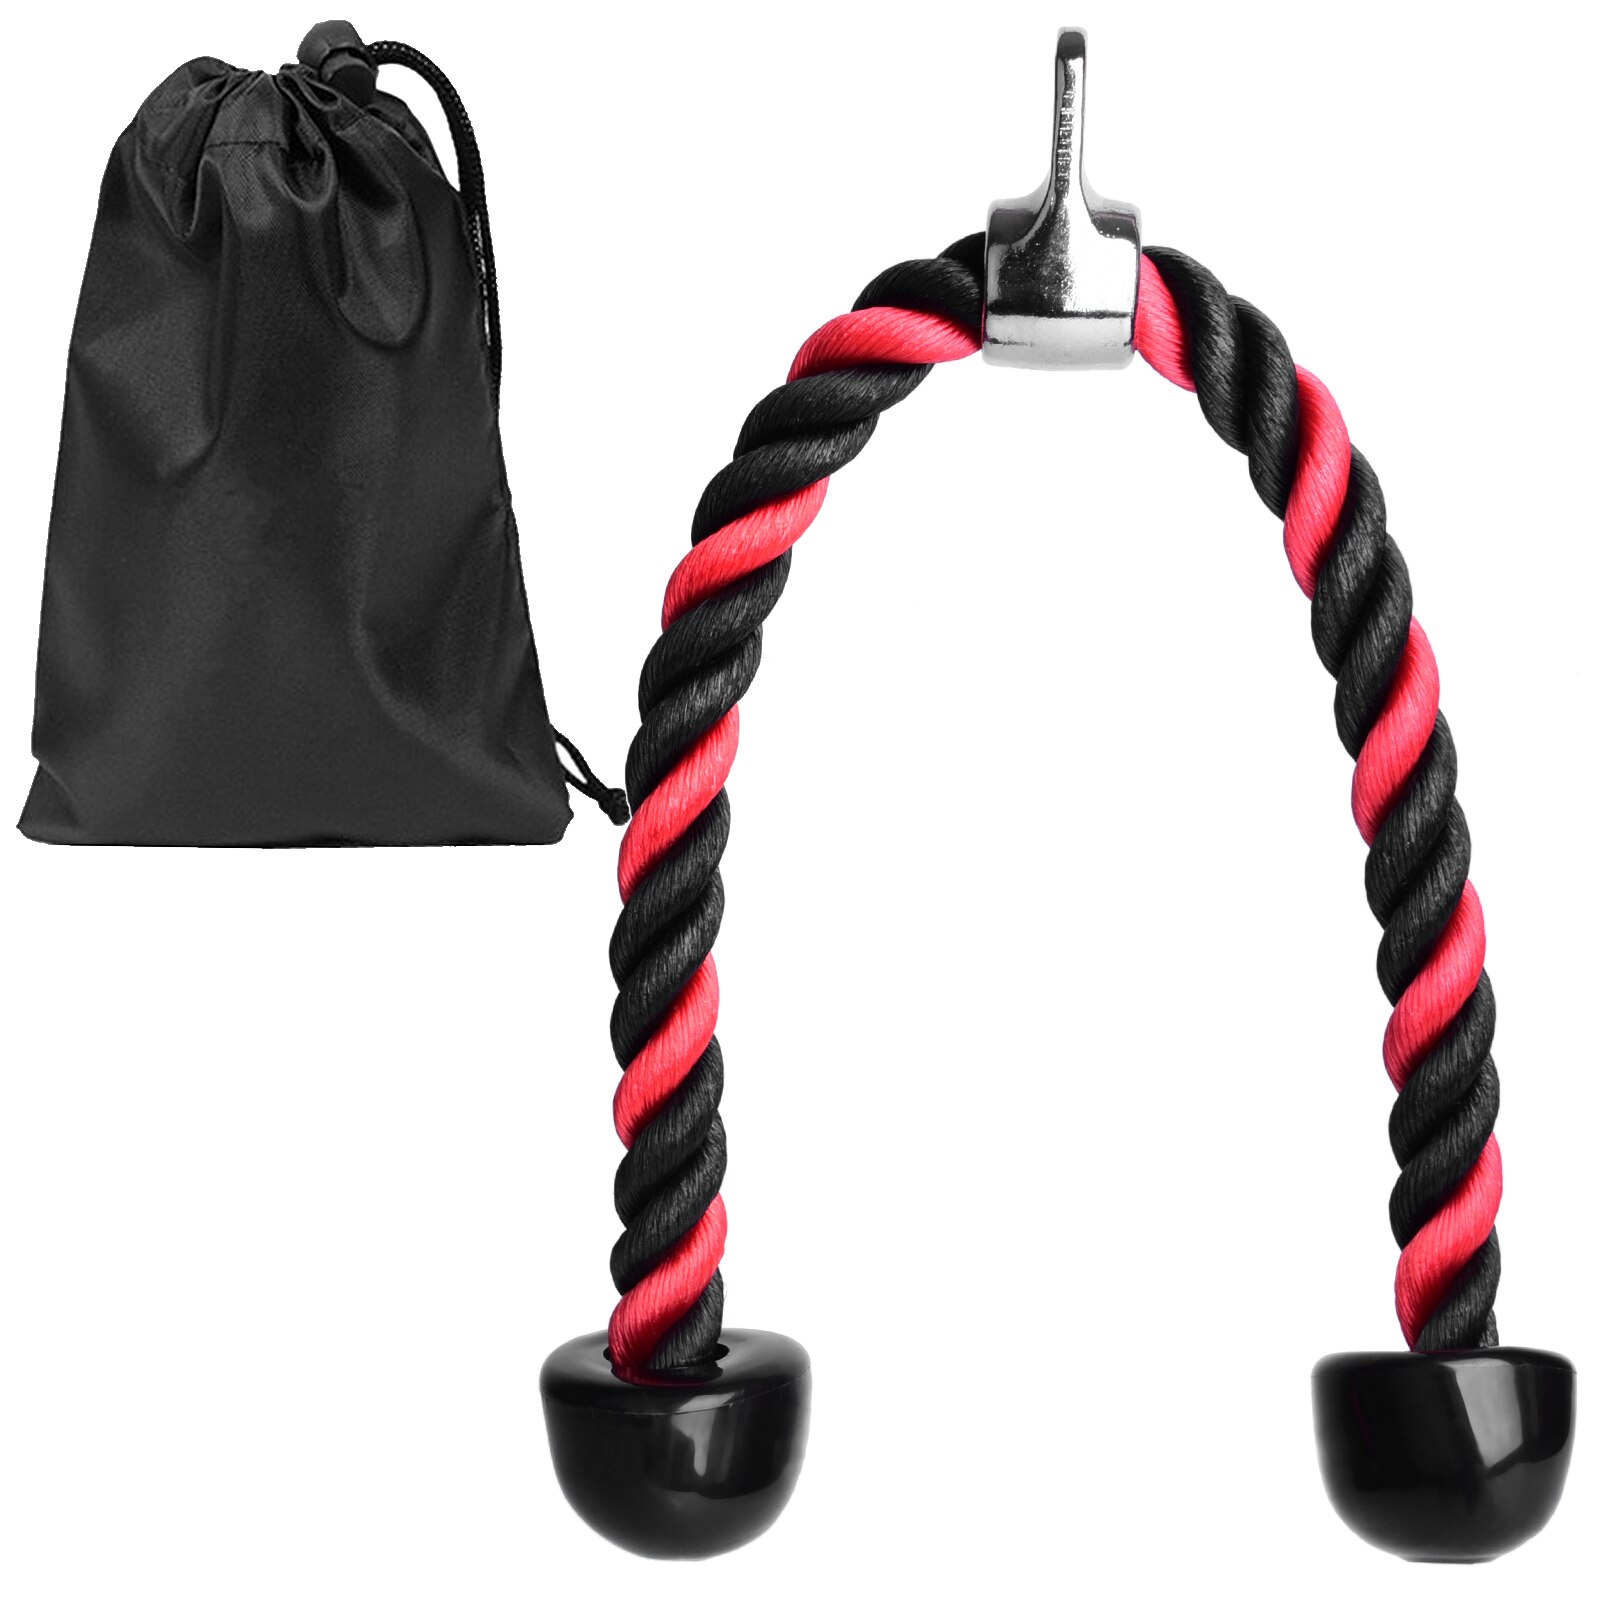 Gym Fitness DIY Pulley Cable Machine Attachments Pull Down Machine Full Set F1094 Back Muscle Biceps Triceps Blaster Trainer: Red Rope with Bag